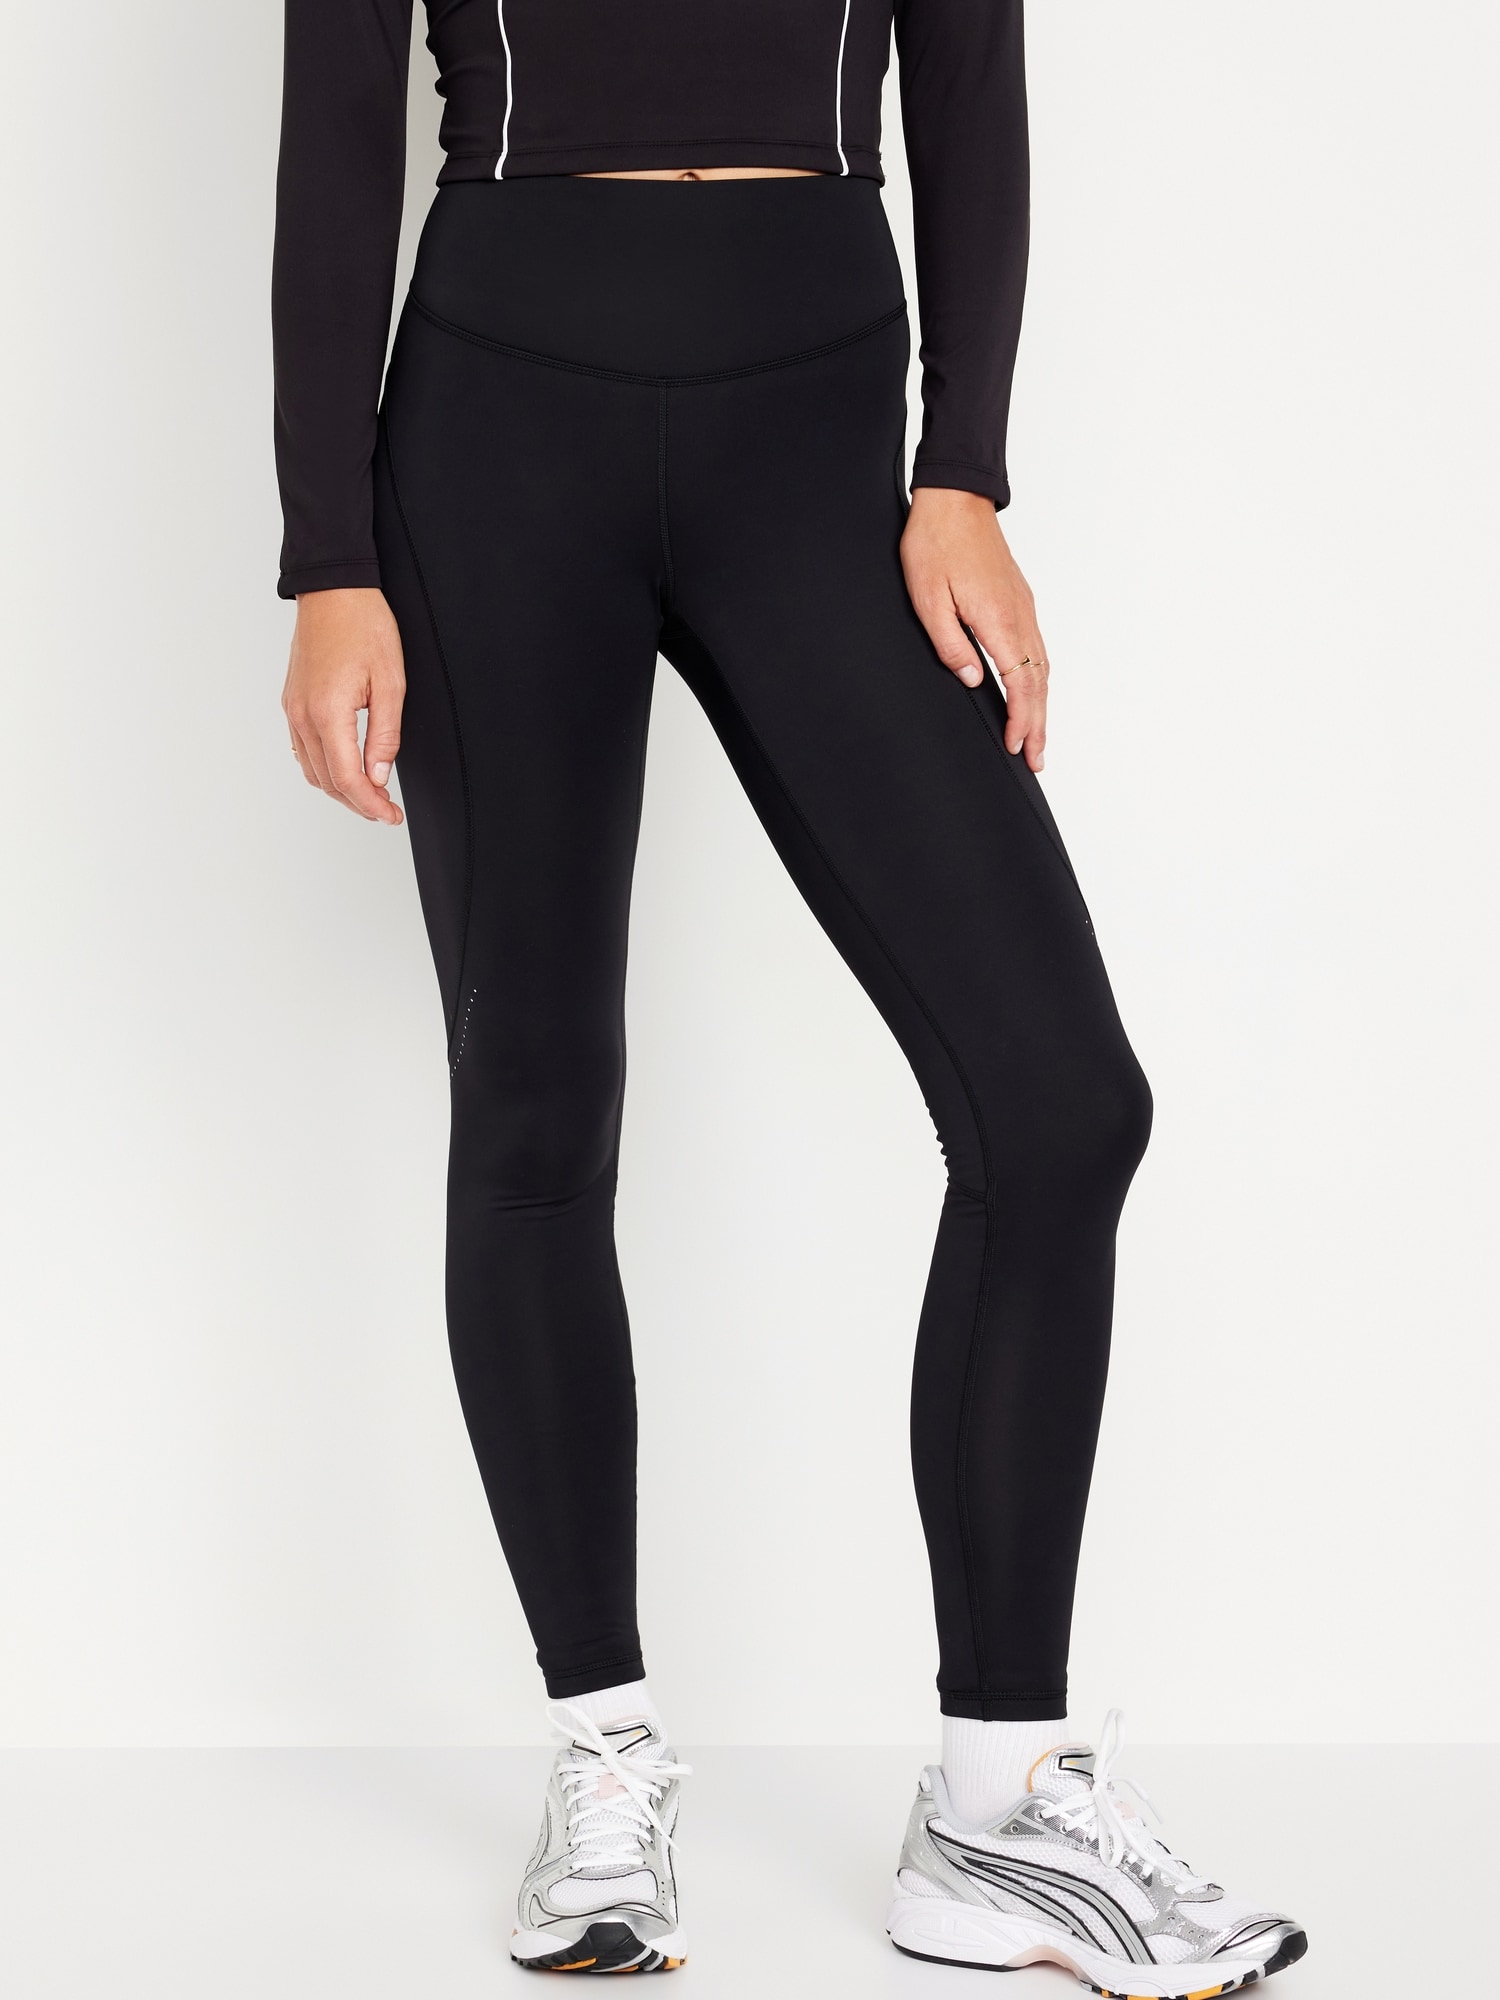 Old Navy Extra High-Waisted PowerSoft Stirrup Leggings for Women - ShopStyle